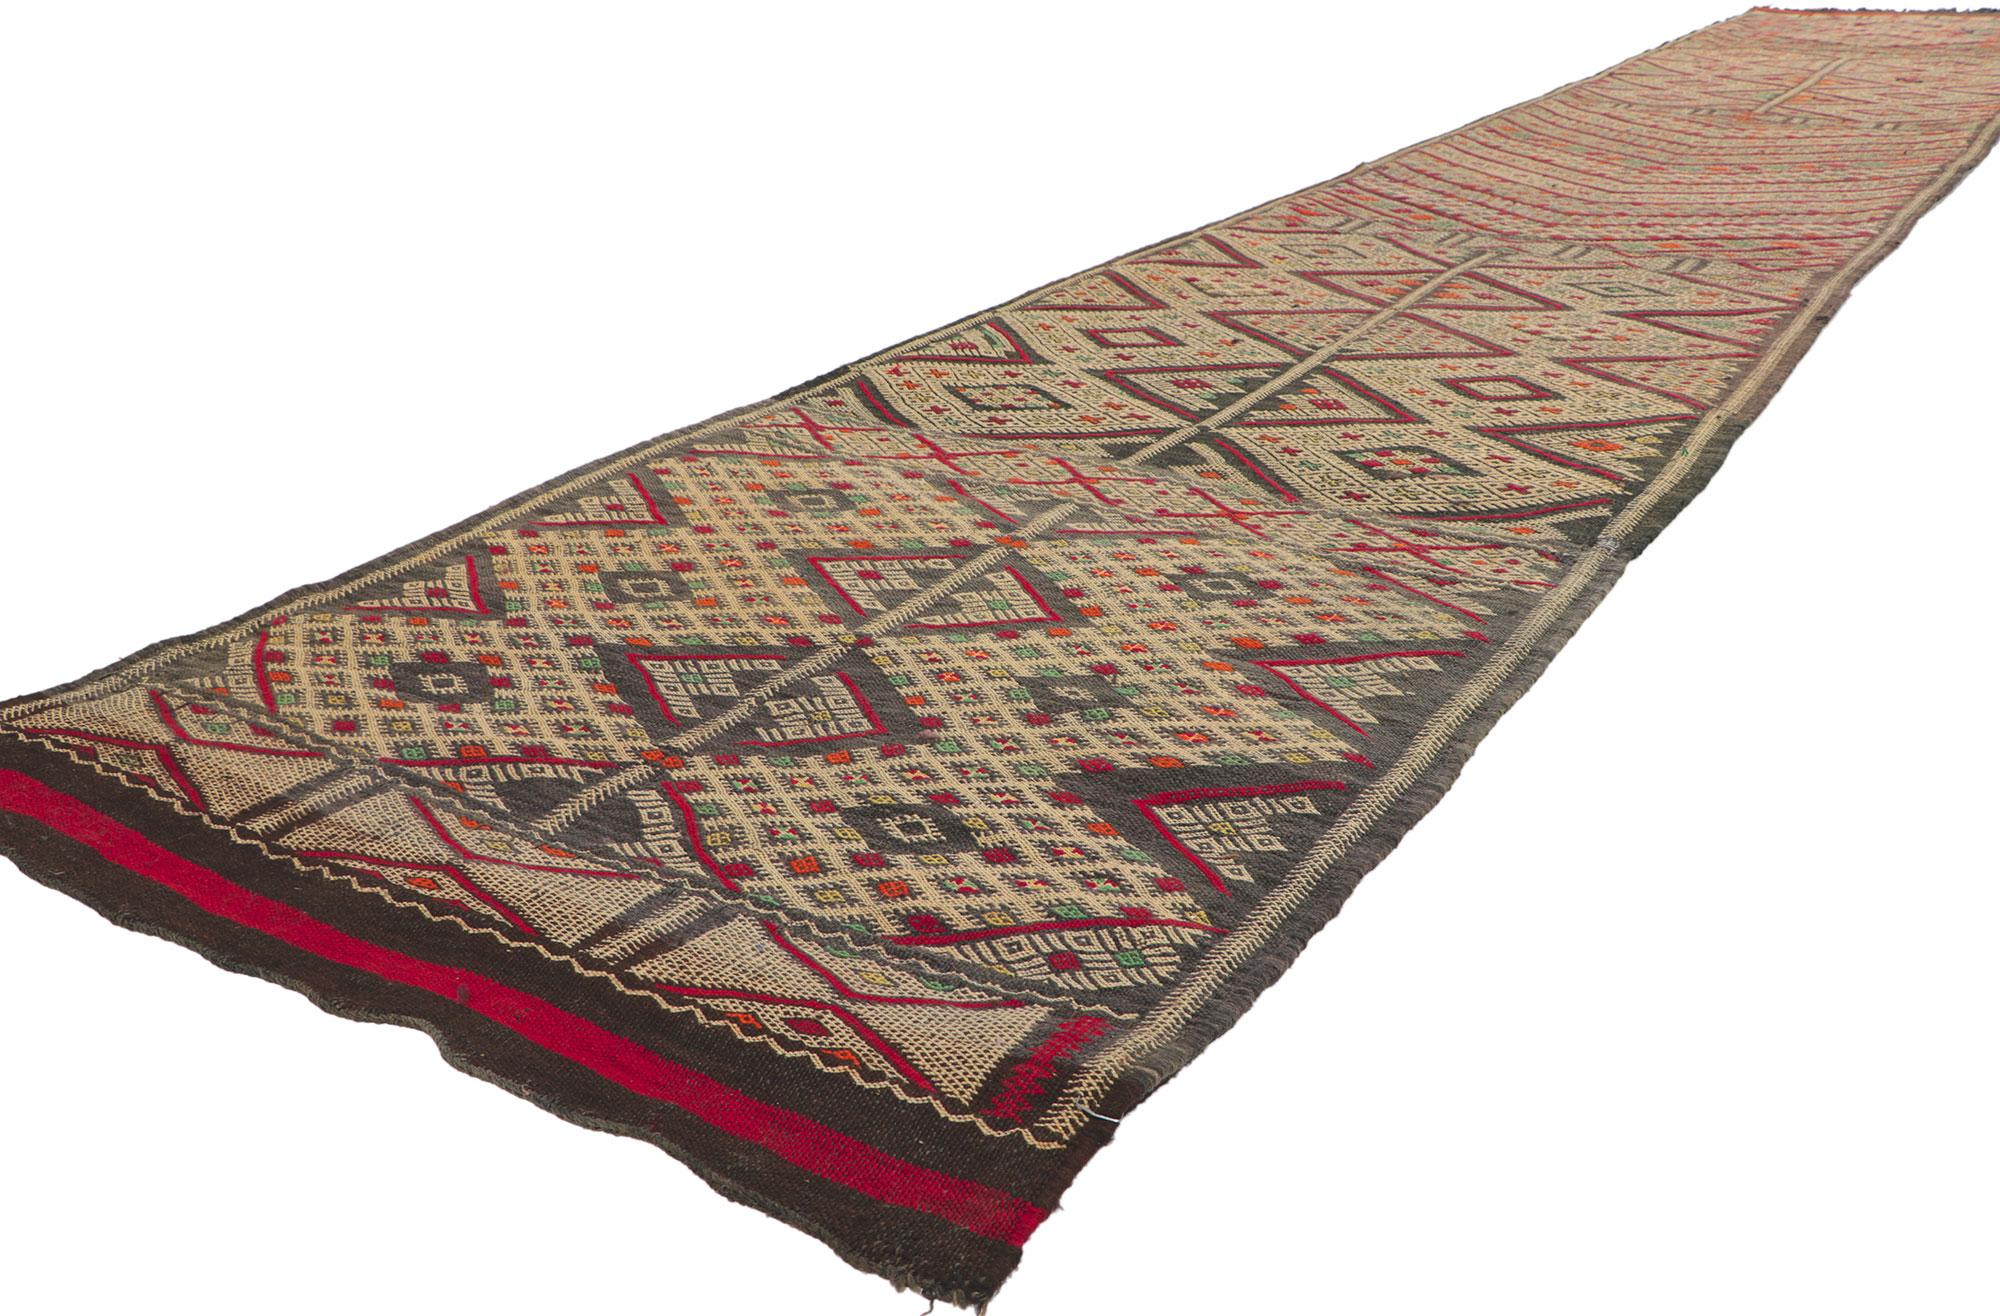 21709 Vintage Zemmour Moroccan Kilim runner, 03'00 x 17'03. Full of tiny details and tribal style, this hand-woven wool vintage Zemmour Berber Moroccan kilim rug runner is a captivating vision of woven beauty. The abrashed field is composed of